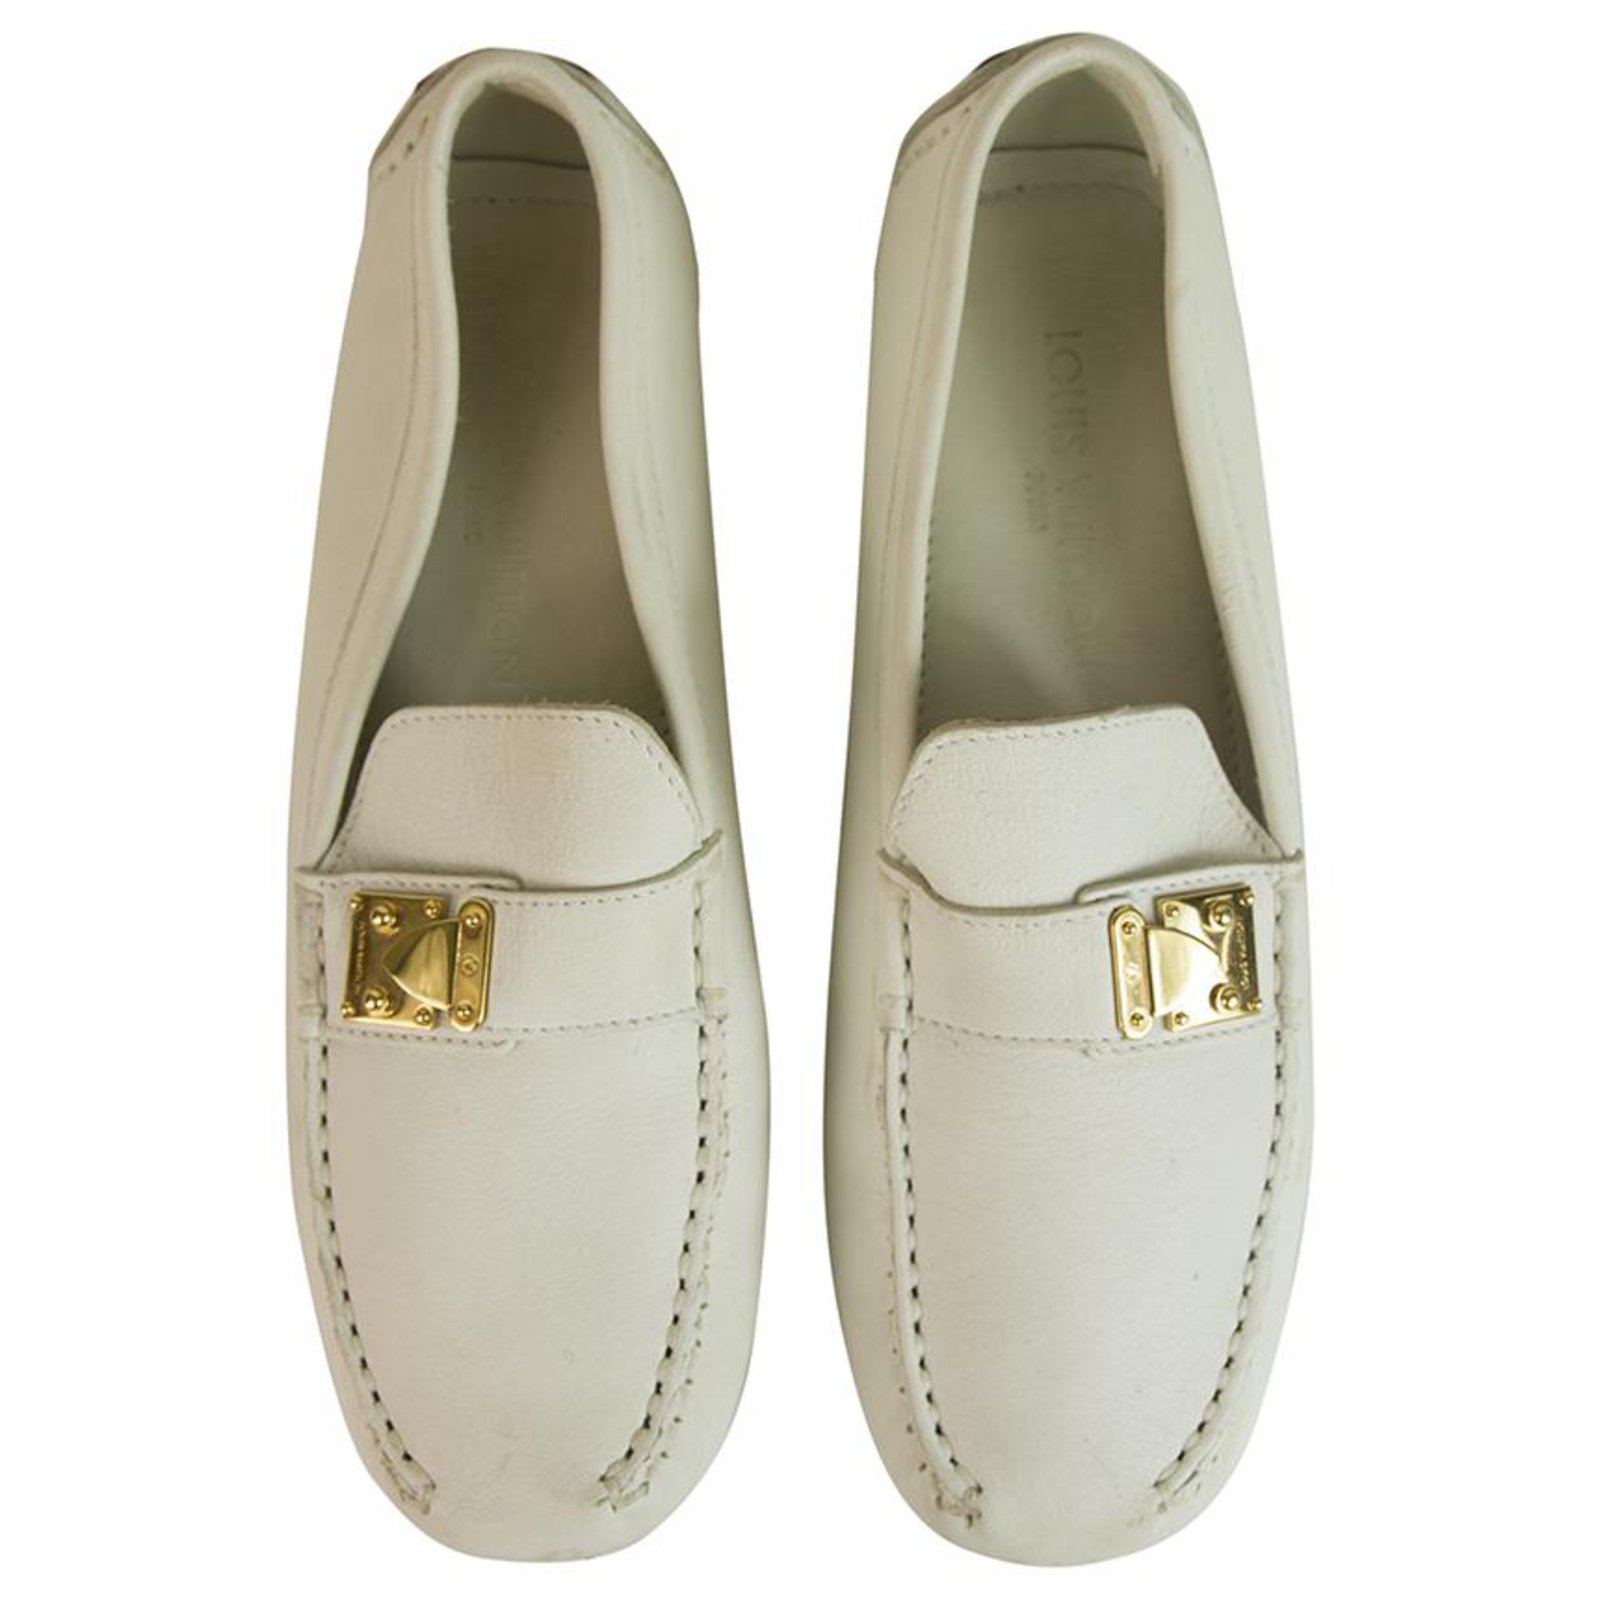 Louis Vuitton white leather loafers flats moccasins shoes gold